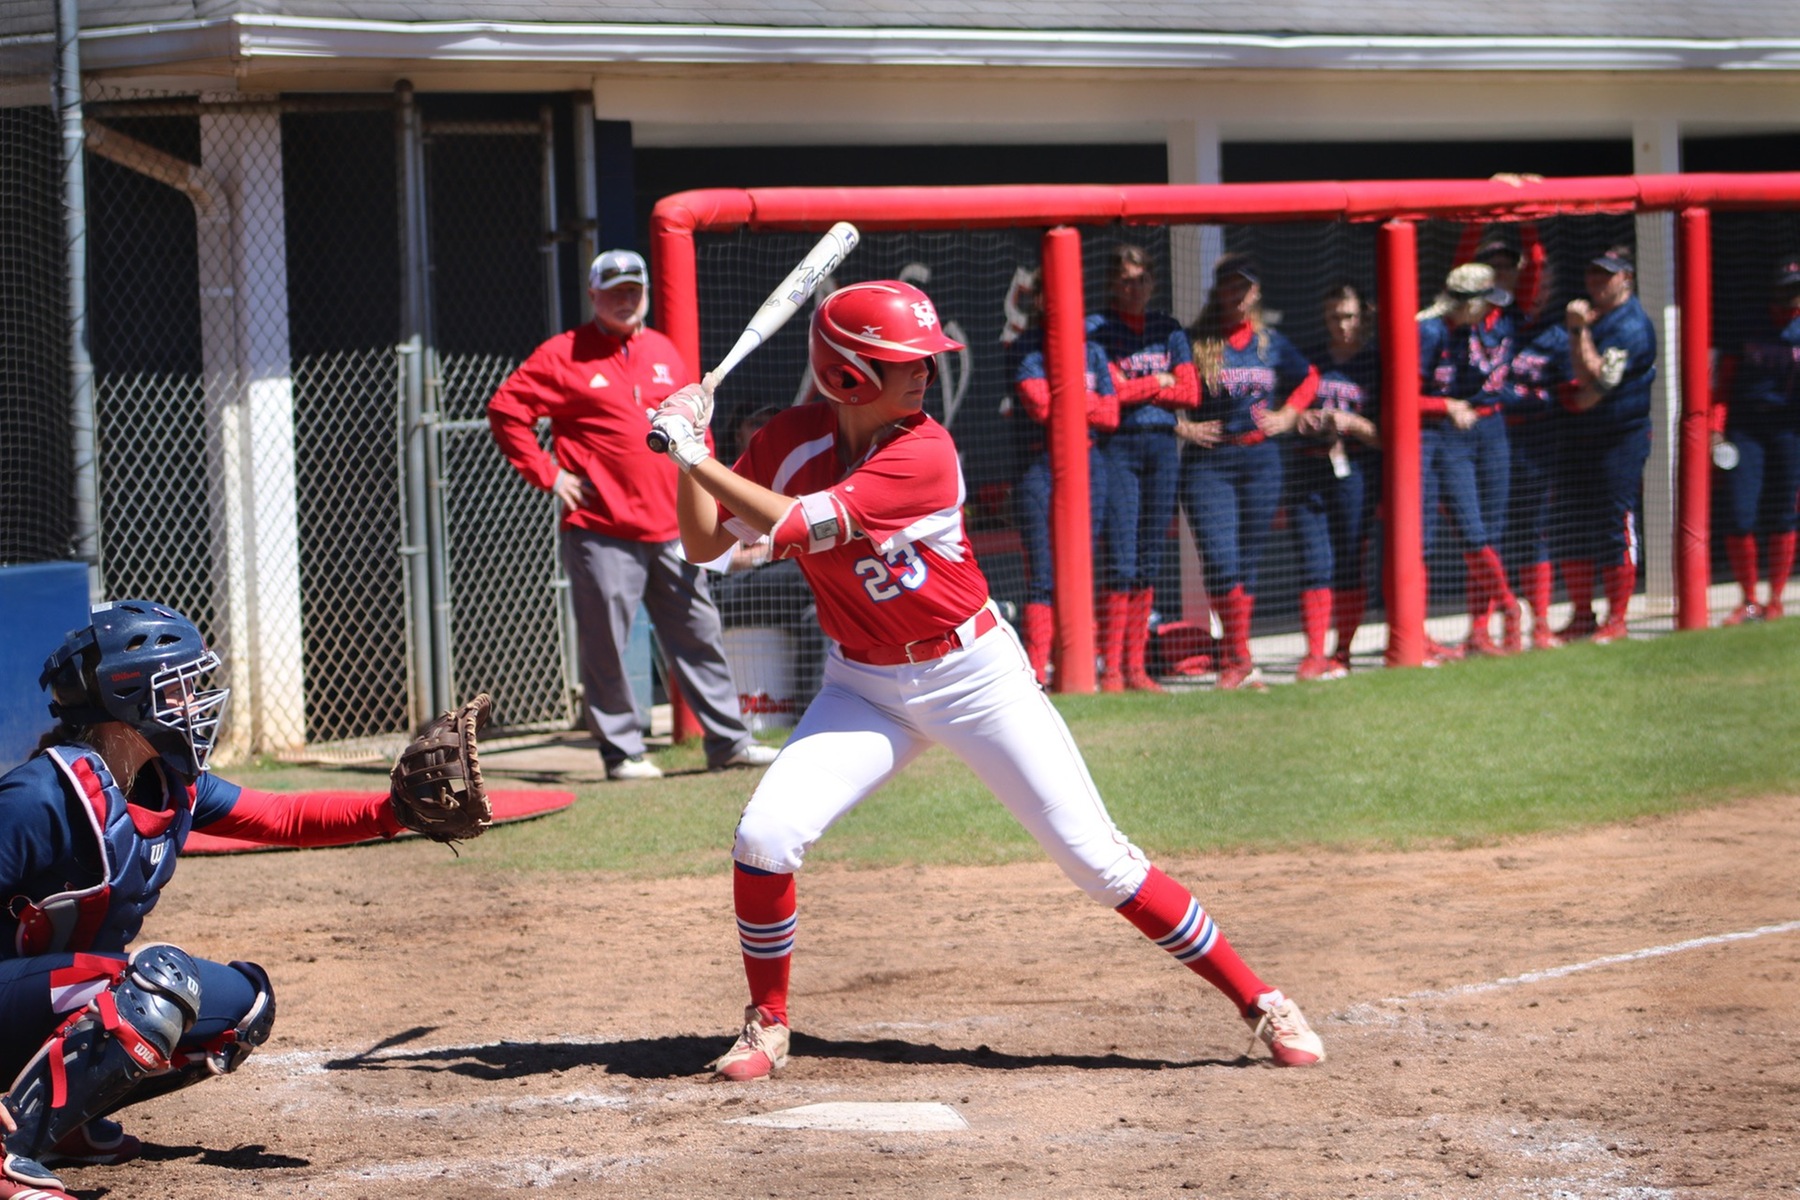 First Baseman Ali King batting against Walters State Community College in the 6-4 victory.